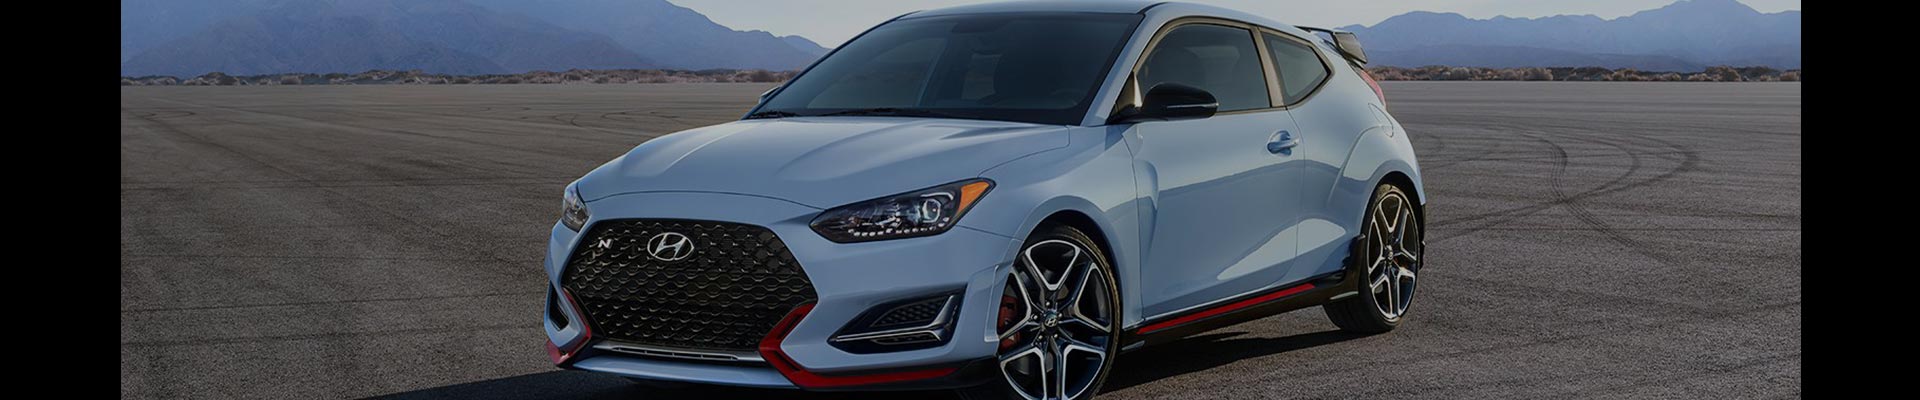 Shop Replacement and OEM 2019 Hyundai Veloster N Parts with Discounted Price on the Net